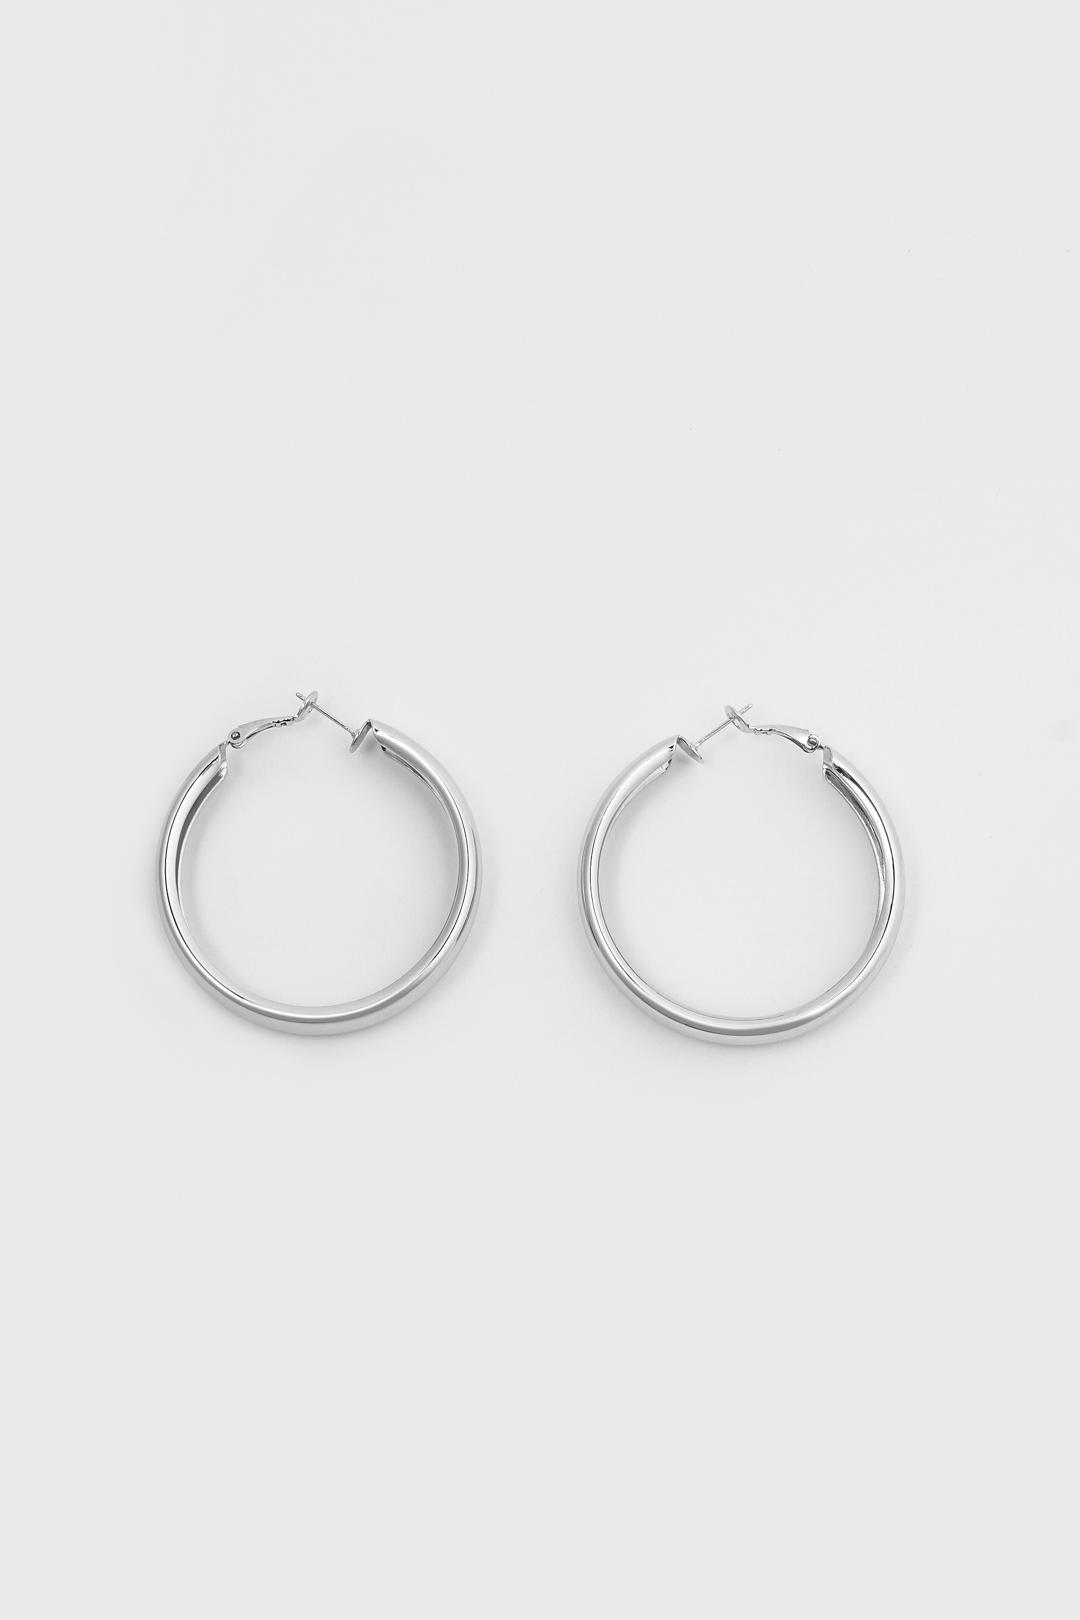 The Large Ravello Hoops